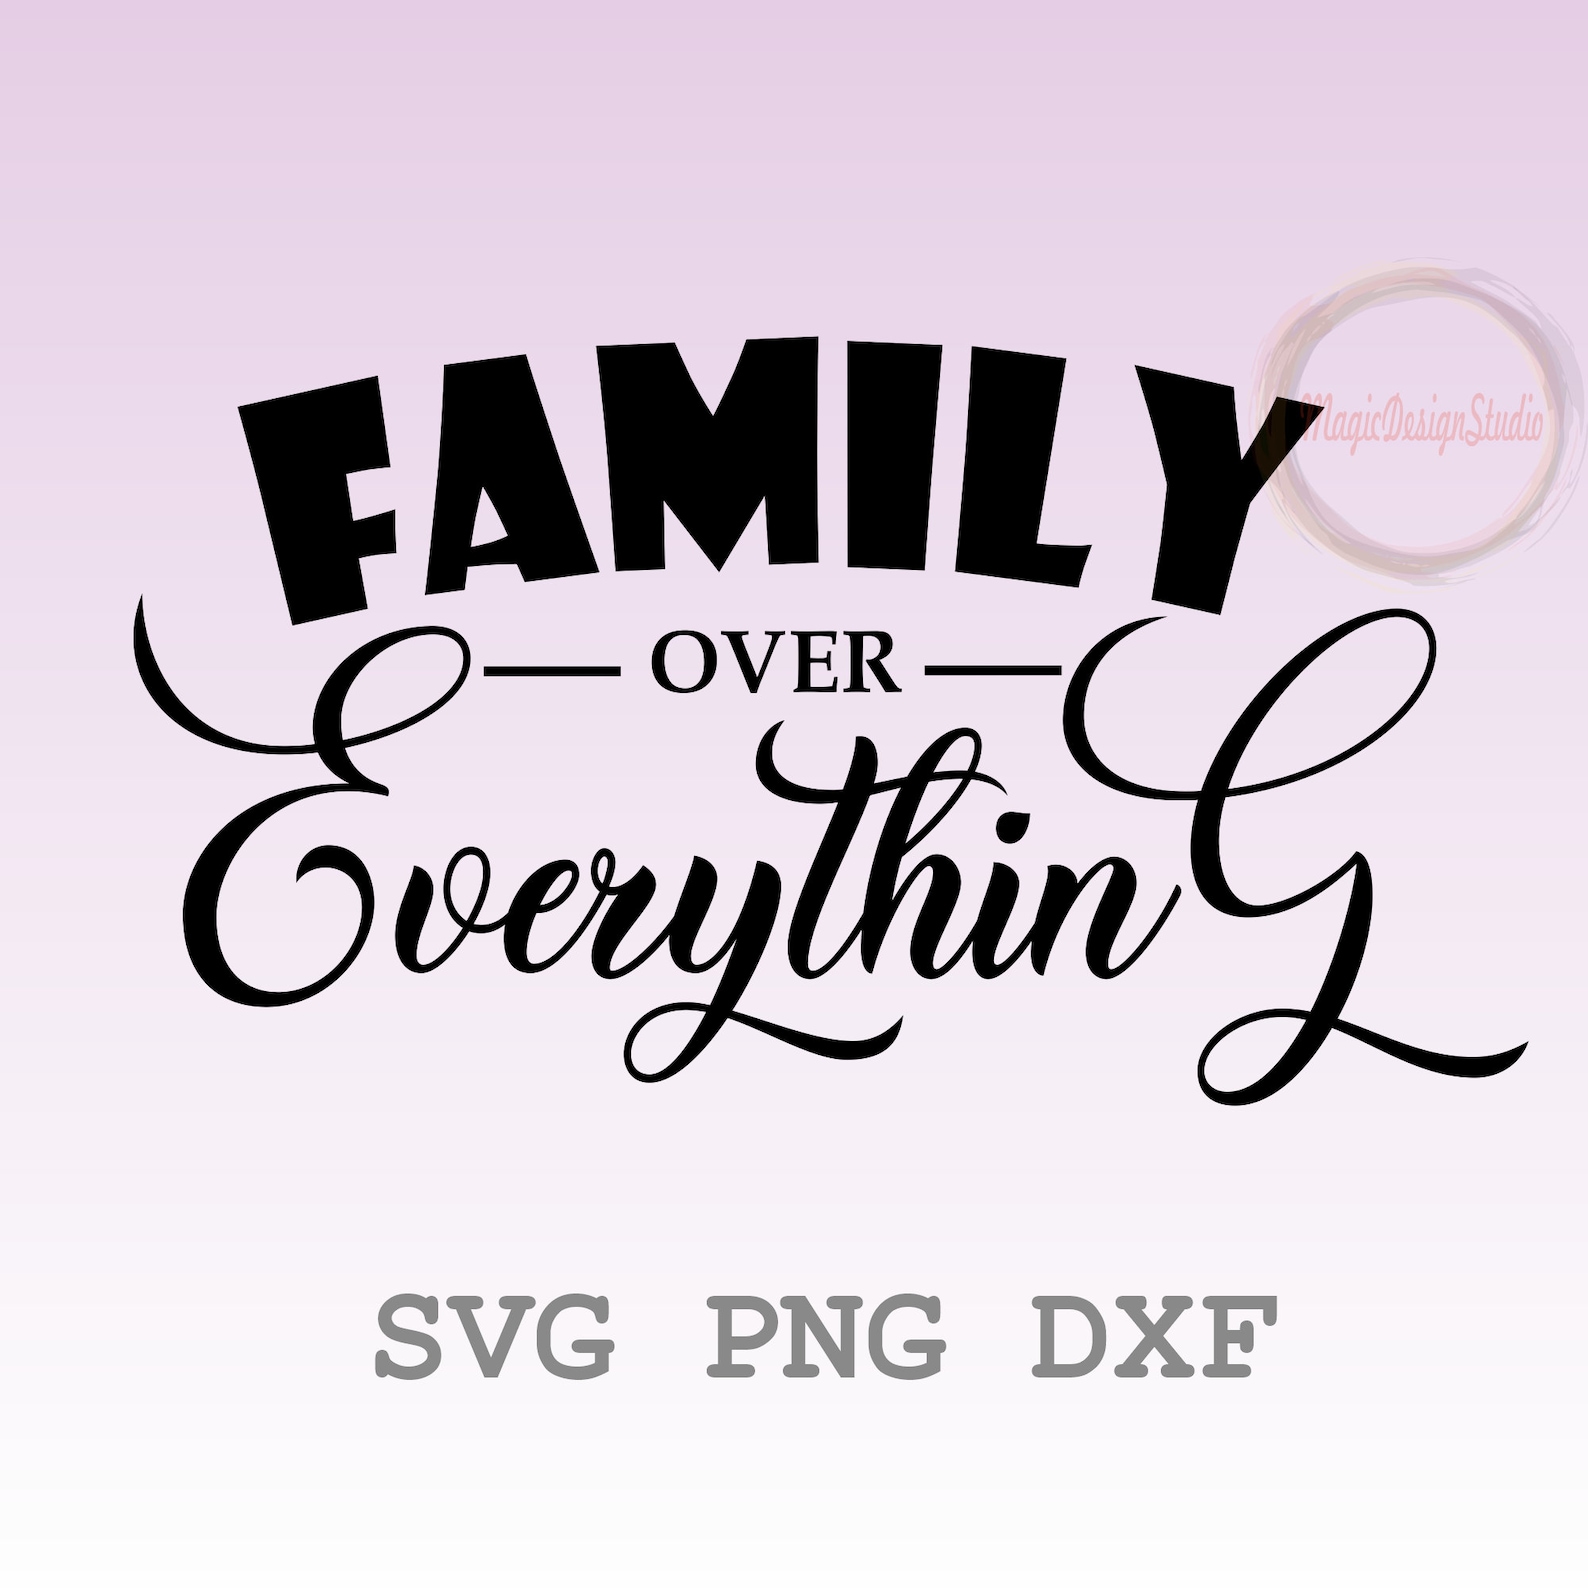 Family Over Everything Svg Png Dxf, Family Svg Clipart, Family Cut File ...